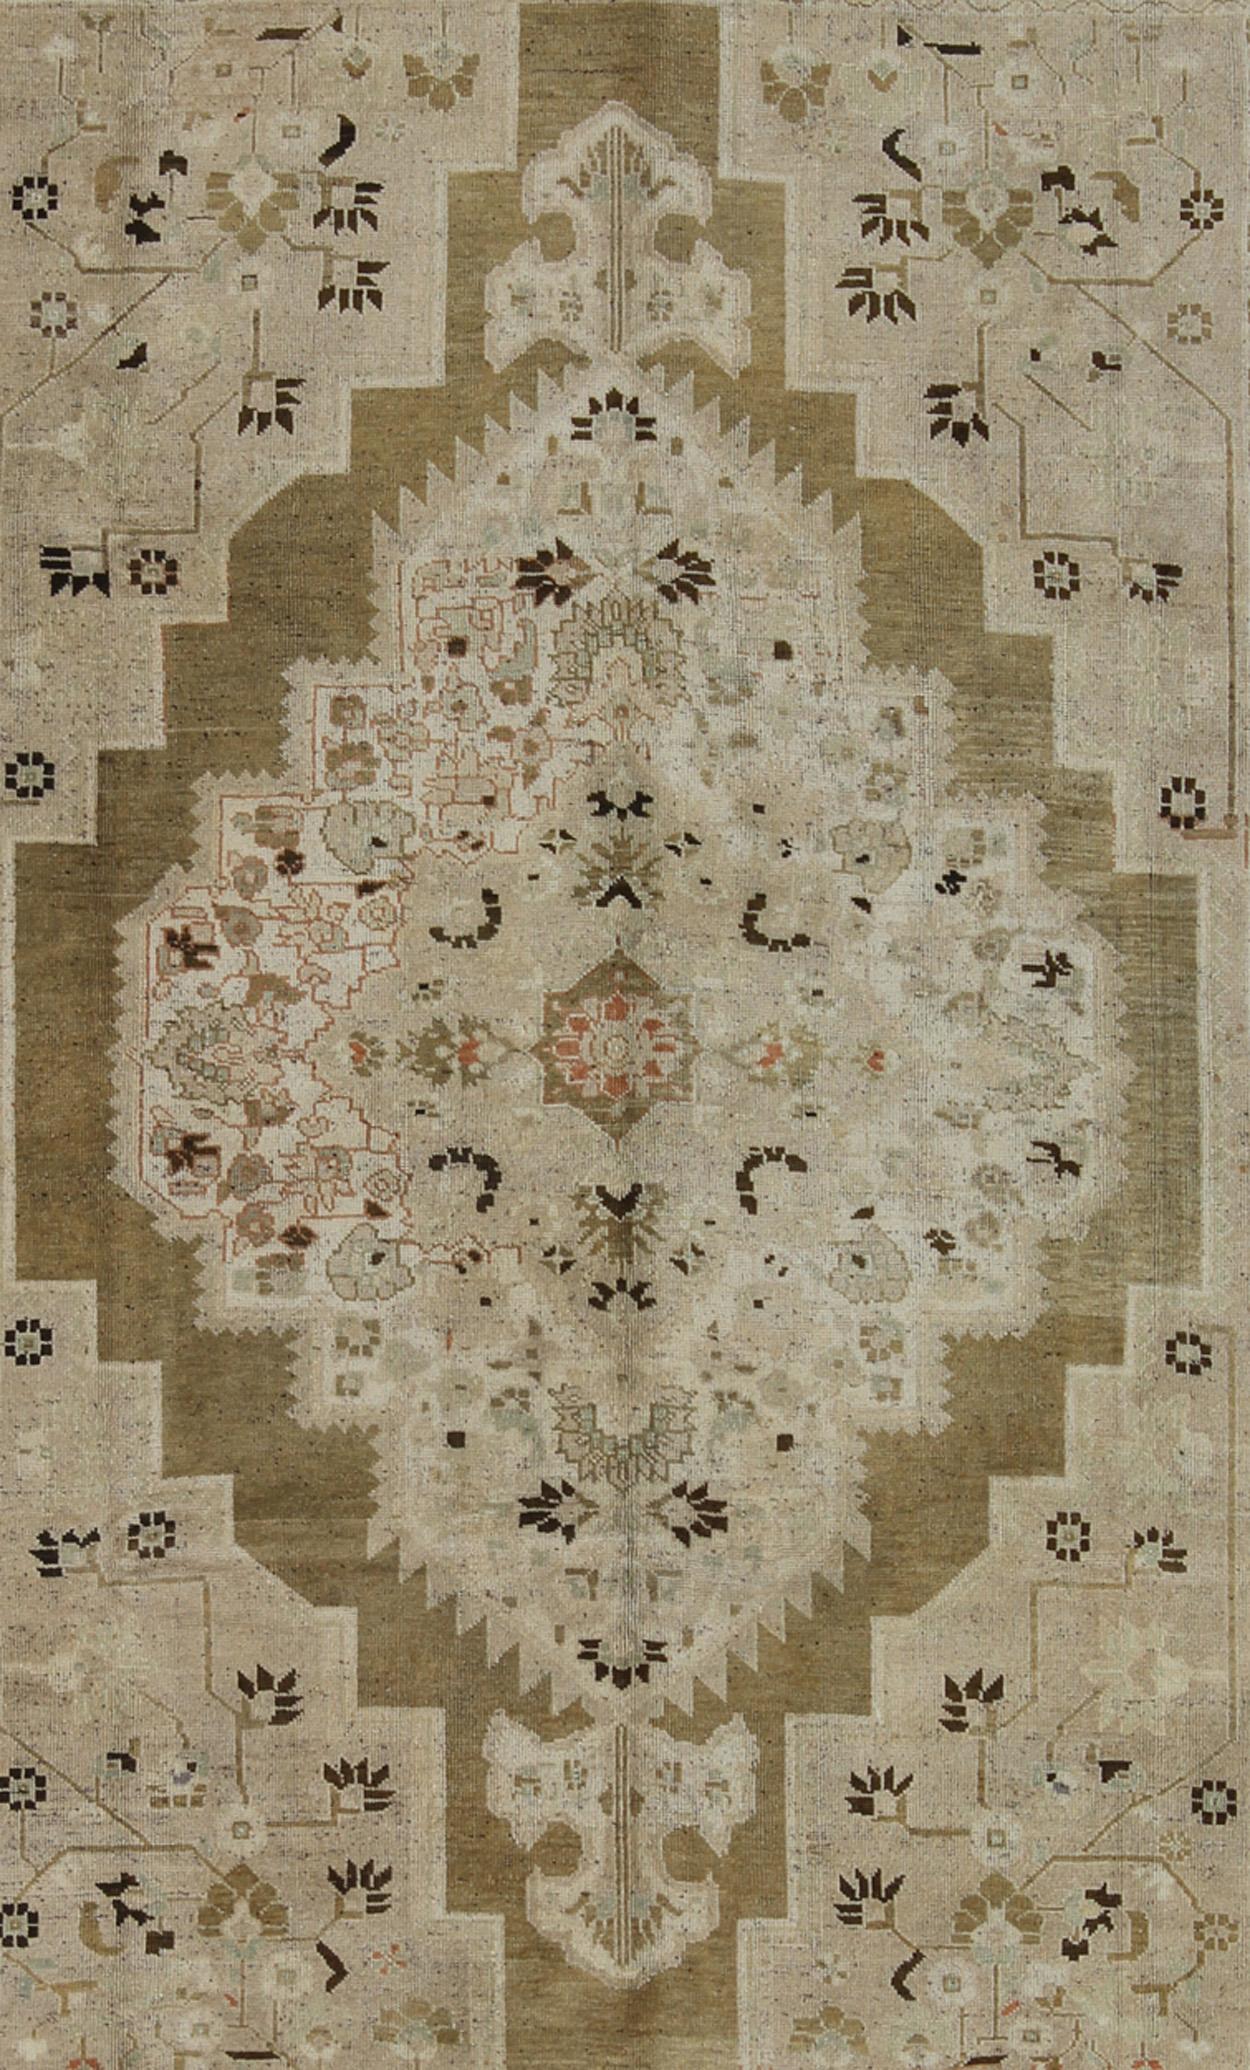 Vintage Floral Medallion Oushak Area Rug in Taupe, Tan, Dark Brown In Good Condition For Sale In Atlanta, GA